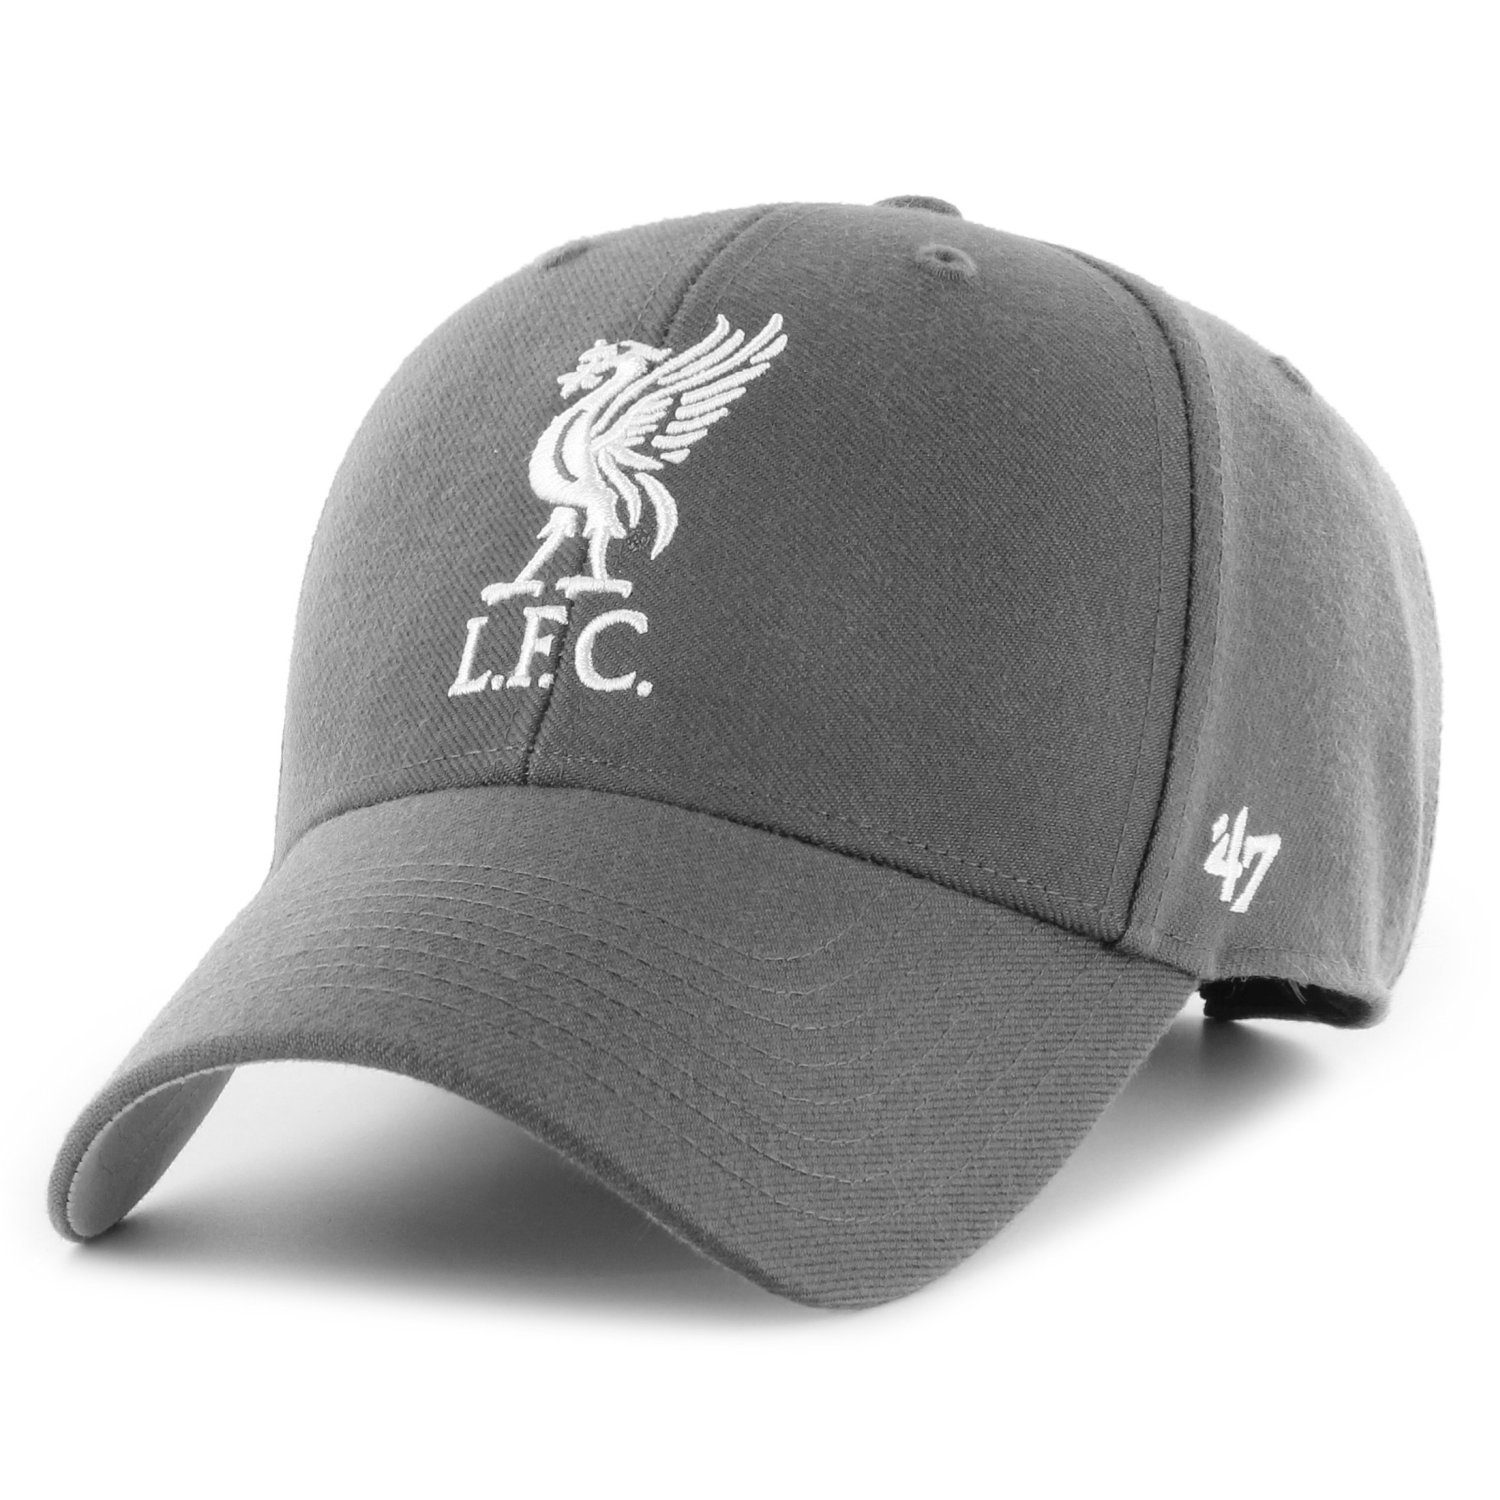 Cap Trucker FC Liverpool Brand Relaxed '47 Fit